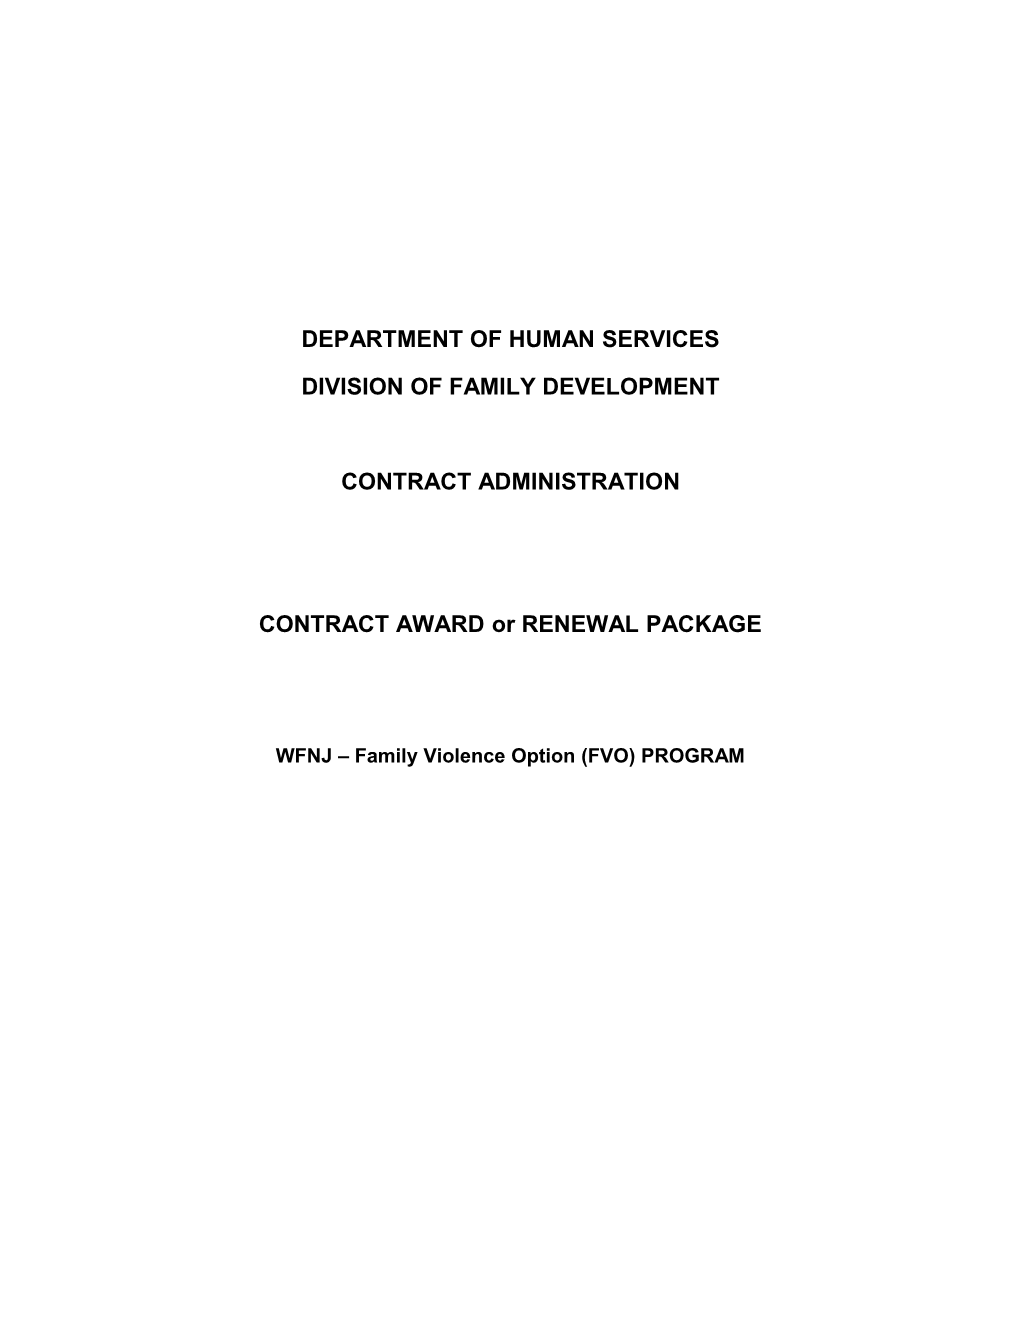 Department of Human Services s13